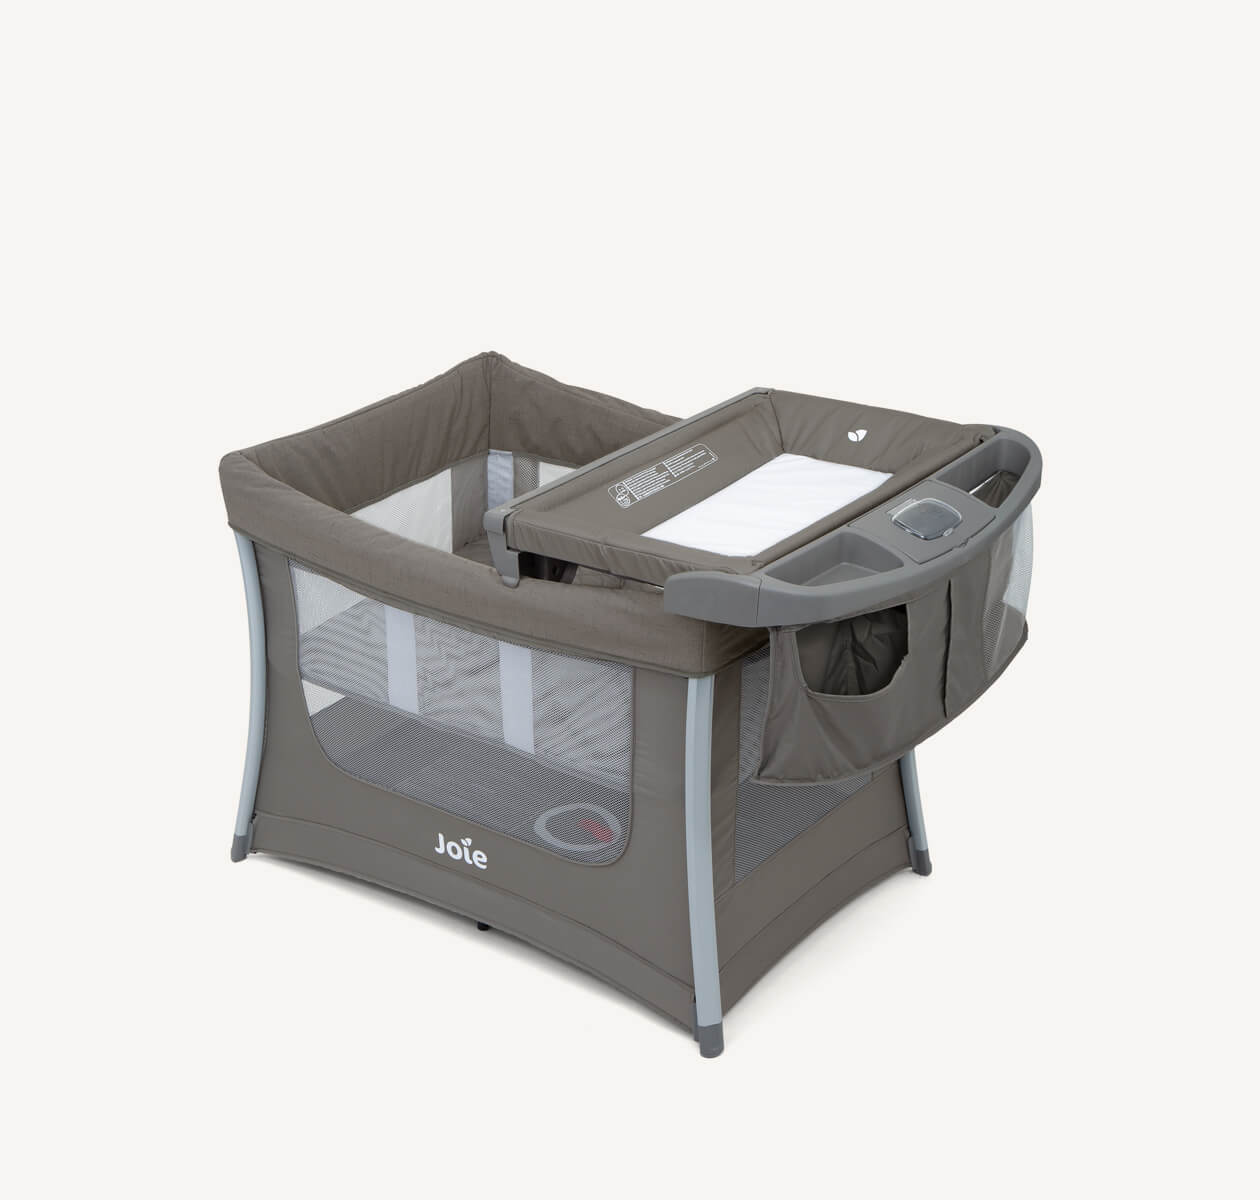 https://dd.joiebaby.com/media/catalog/product/p/1/p1-joie-travel-cot-illusion-nickel-left-angle.jpg?type=product&height=265&width=265